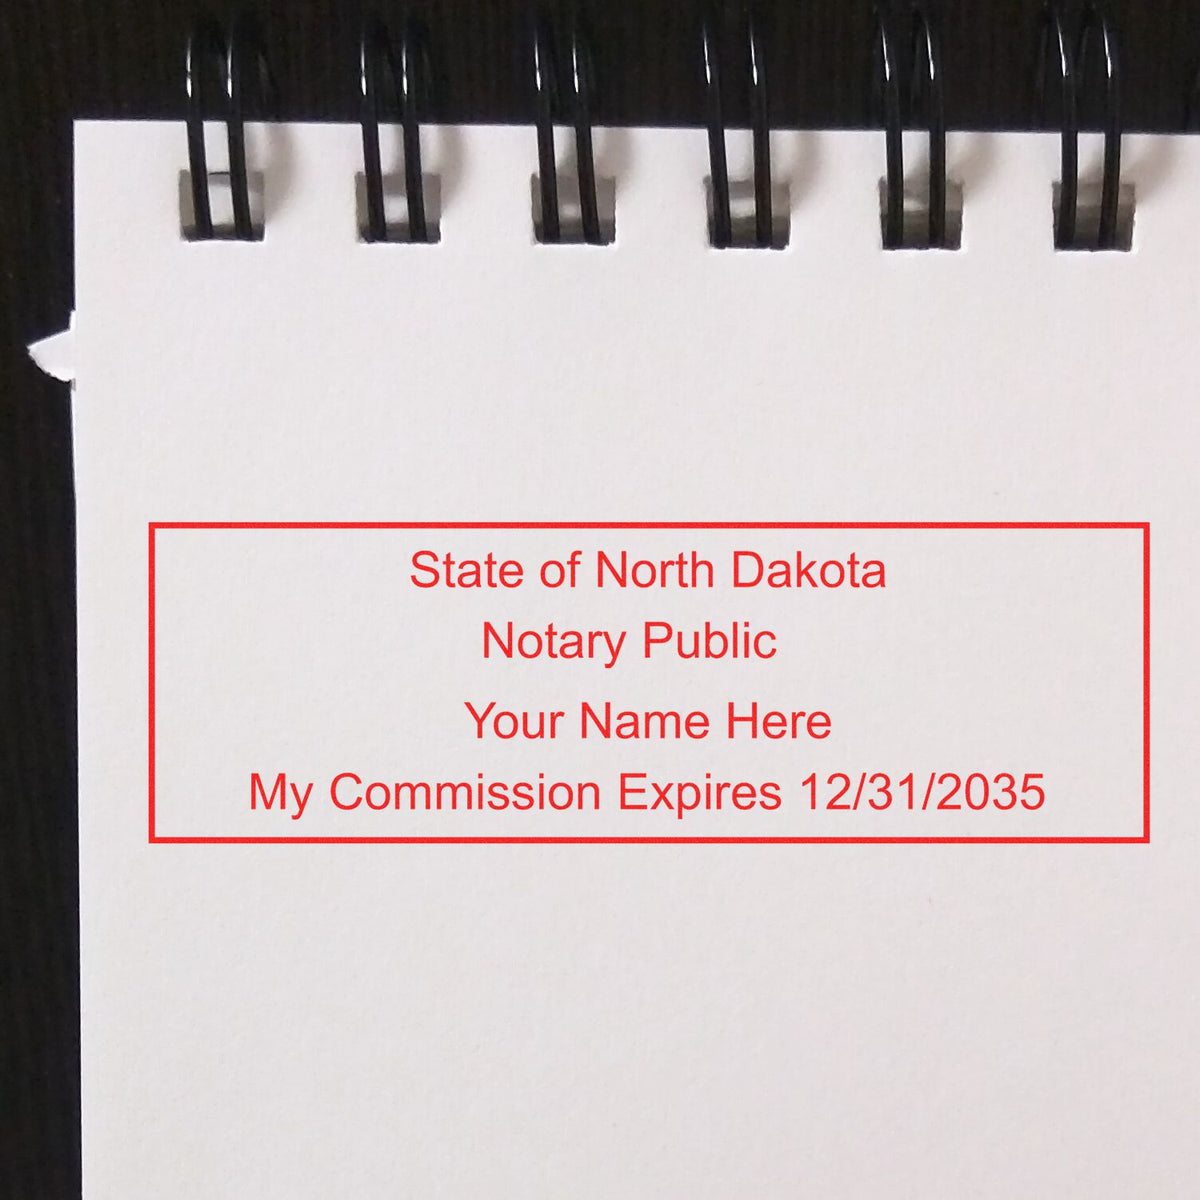 An alternative view of the MaxLight Premium Pre-Inked North Dakota Rectangular Notarial Stamp stamped on a sheet of paper showing the image in use